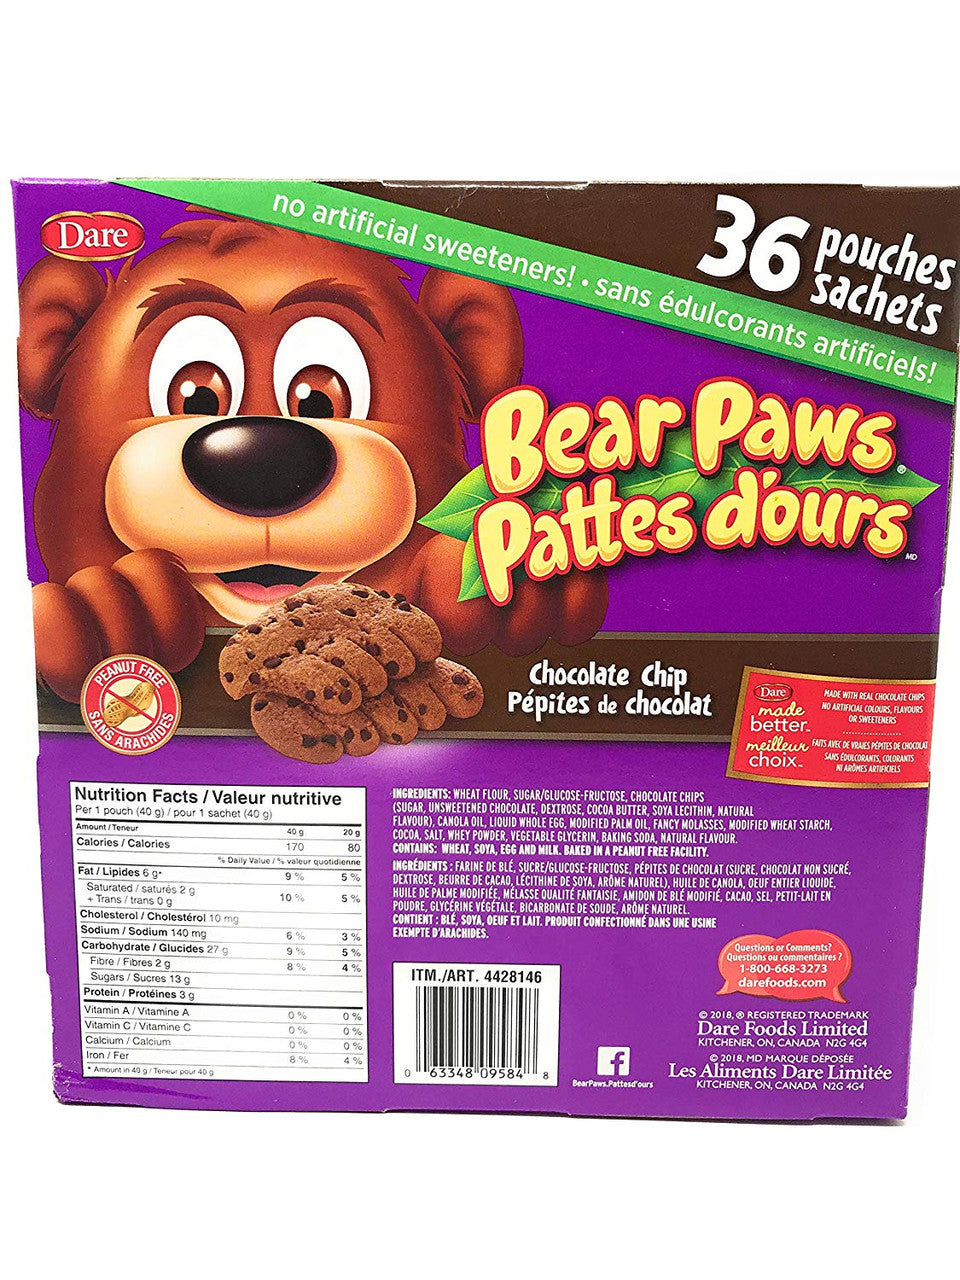 Dare Bear Paws Chocolate Chip Cookies, 36packs, 1.44kg/3.2lbs, (Imported from Canada)